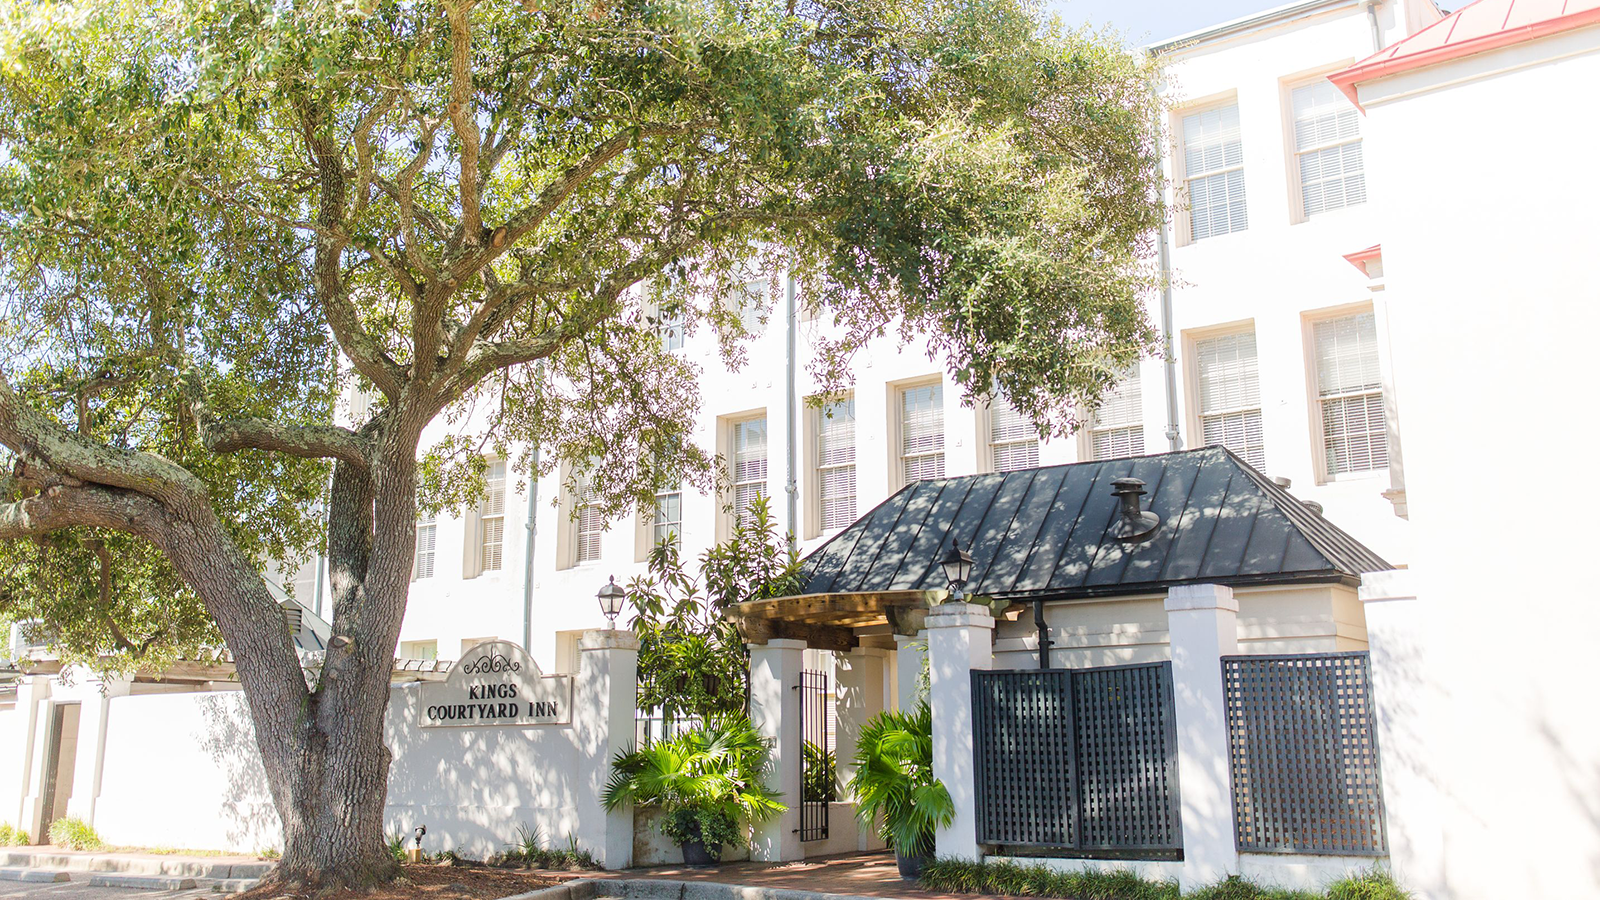 Image of Exterior, Kings Courtyard Inn in Charleston, South Carolina, 1853, Member of Historic Hotels of America, Special Offers, Discounted Rates, Families, Romantic Escape, Honeymoons, Anniversaries, Reunions